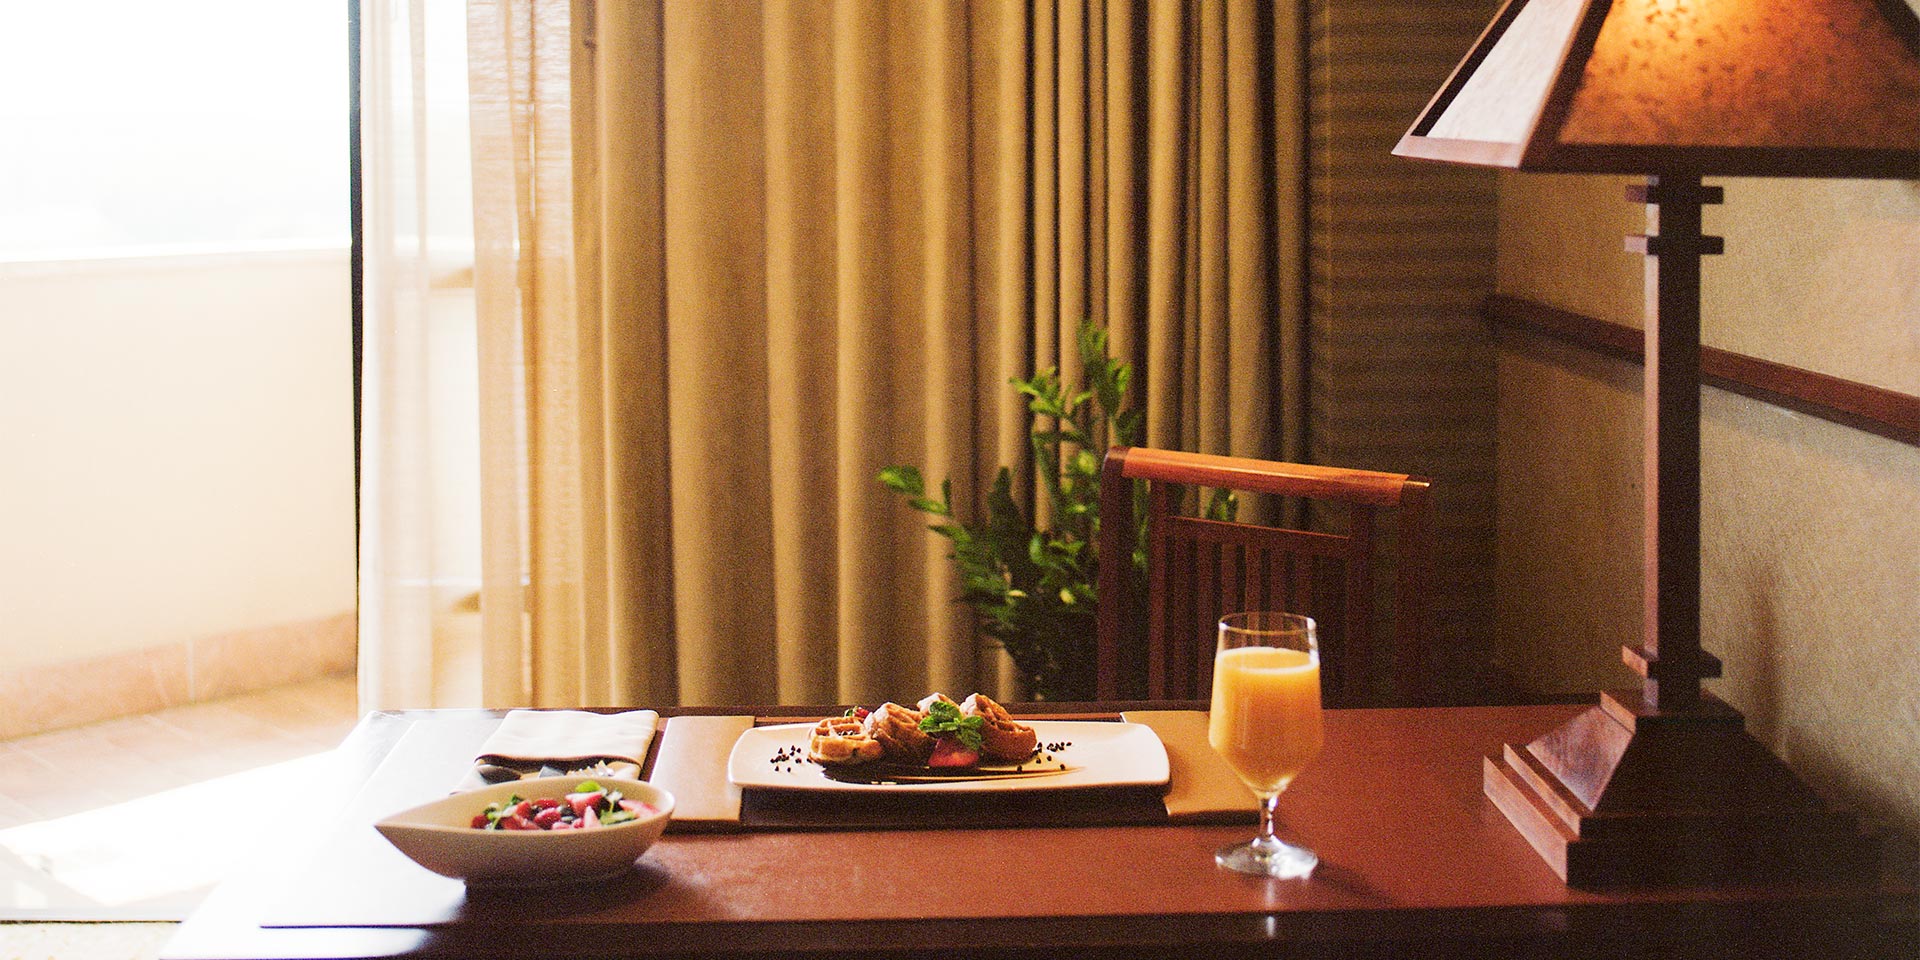 Waffles, orange juice, and a bowl of fruit is placed on a brown wooden table in a well light room.